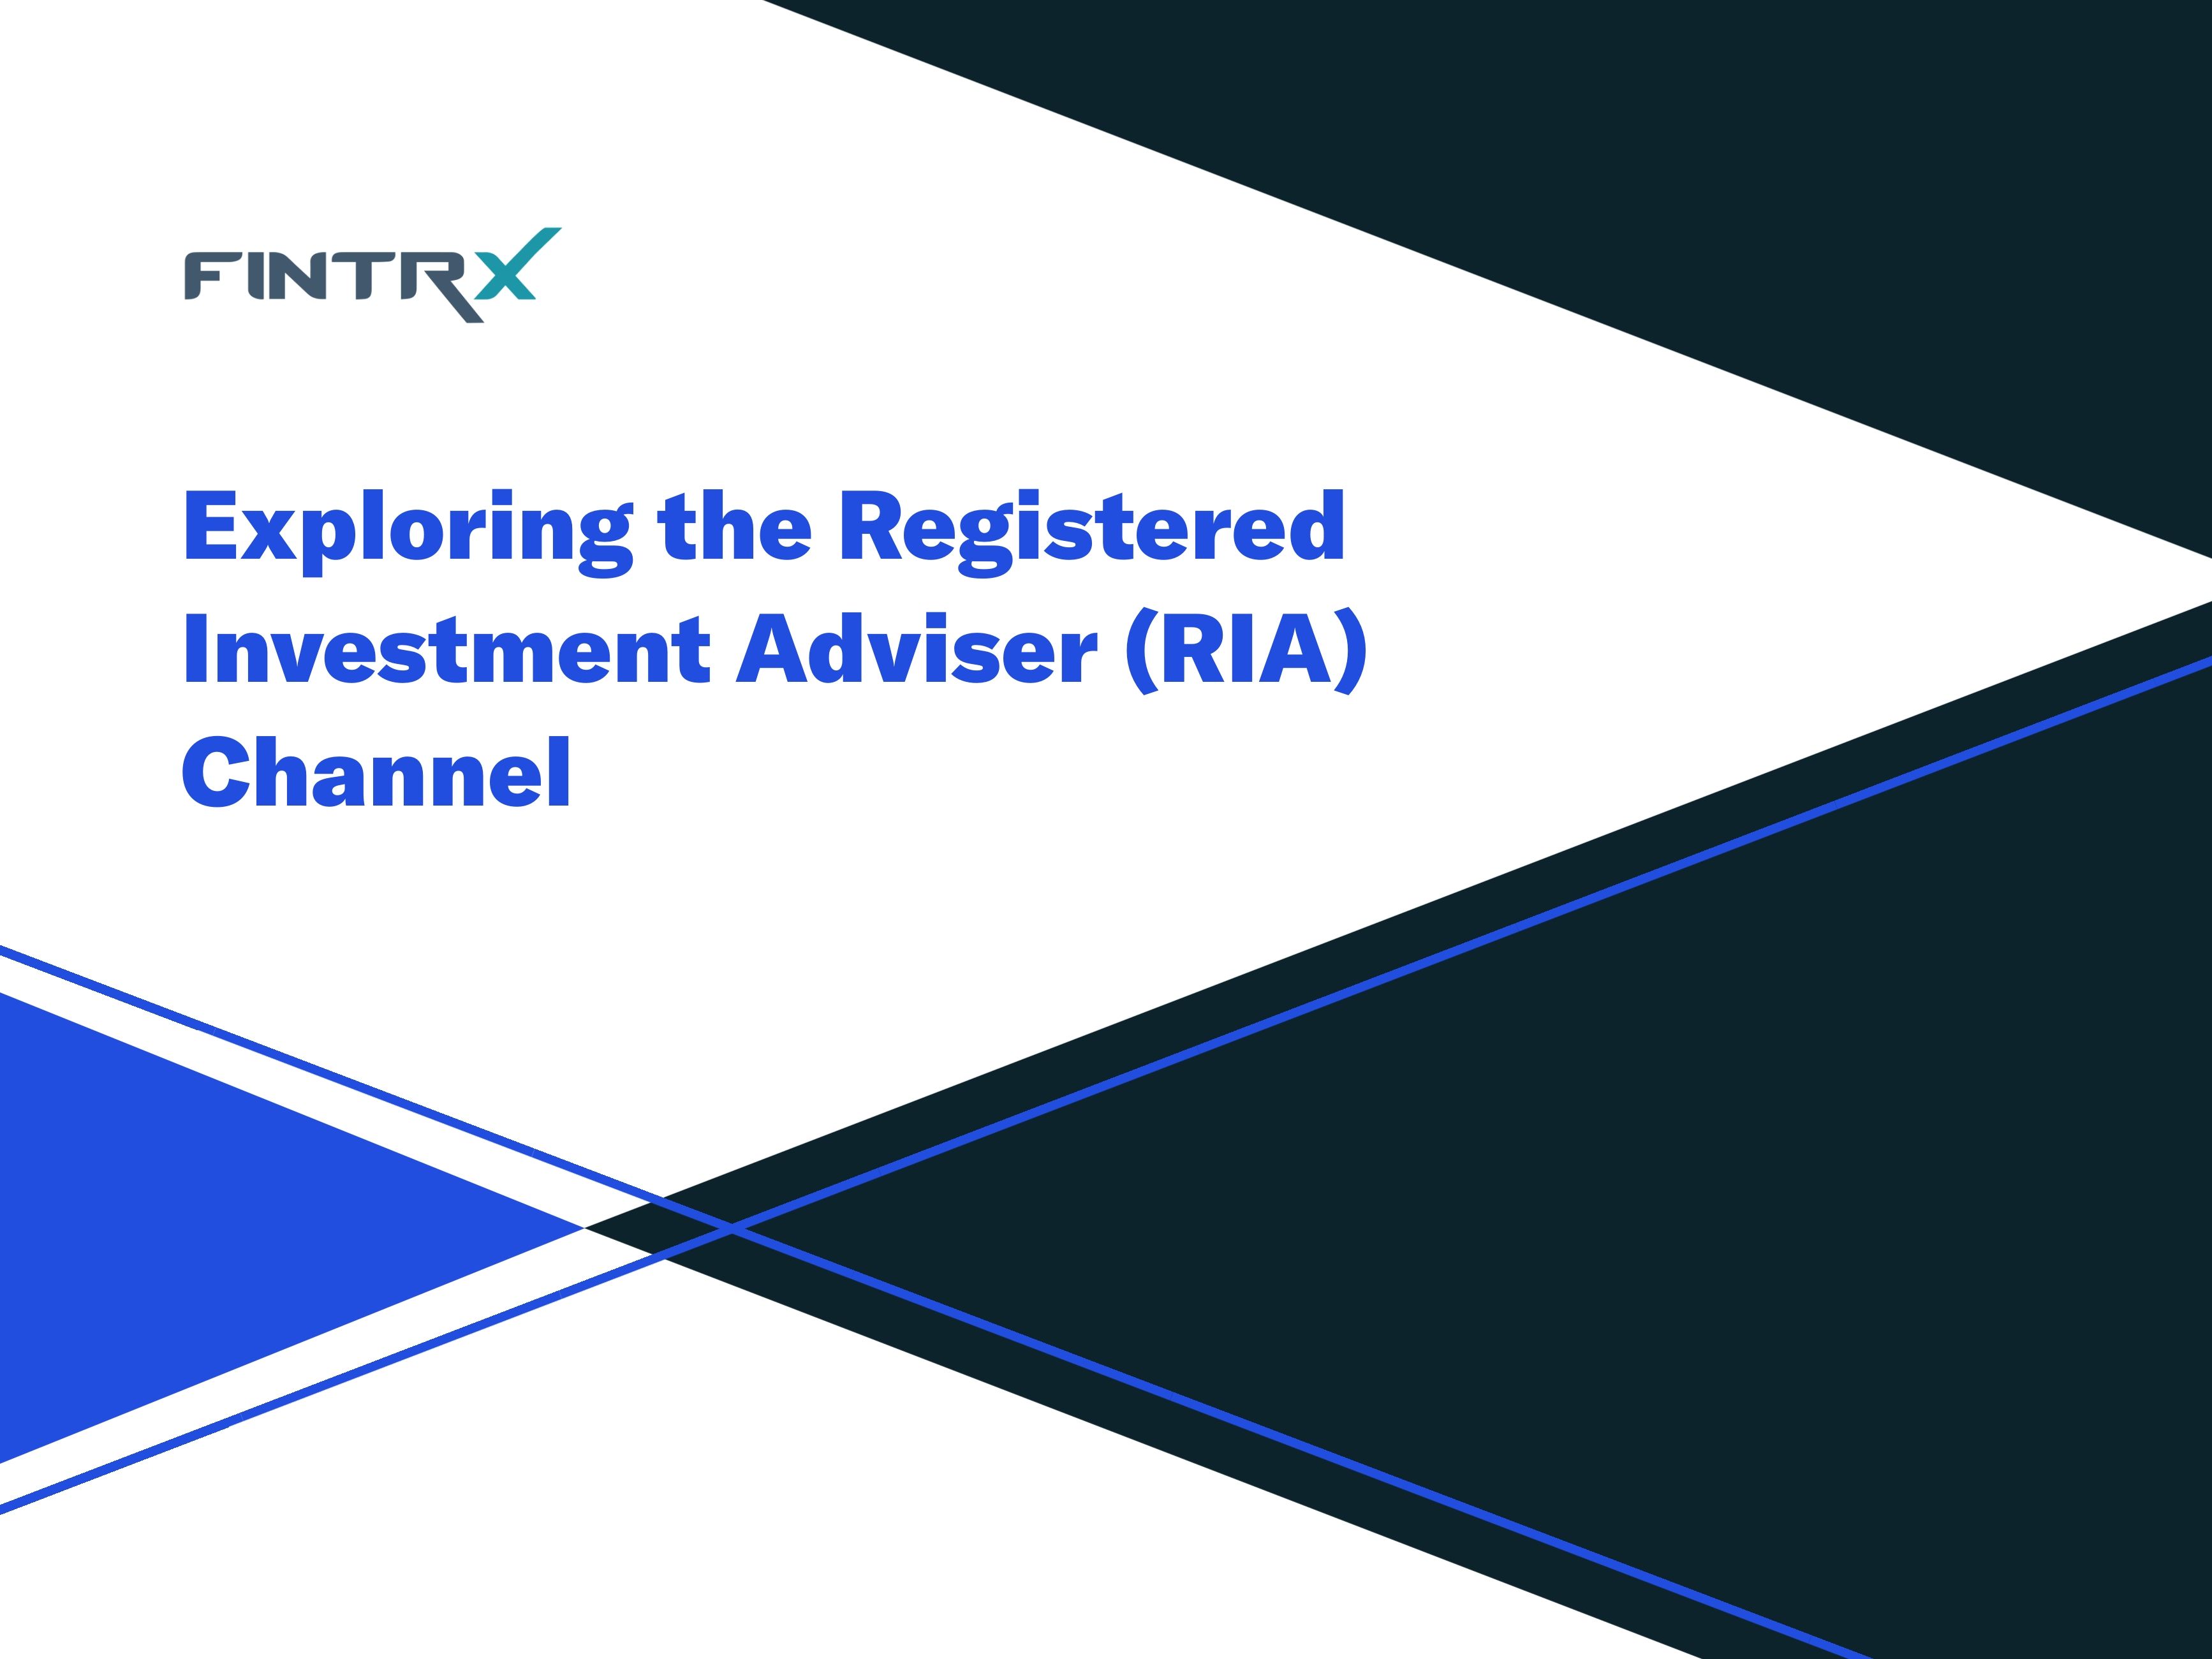 Exploring the Registered Investment Adviser (RIA) Channel